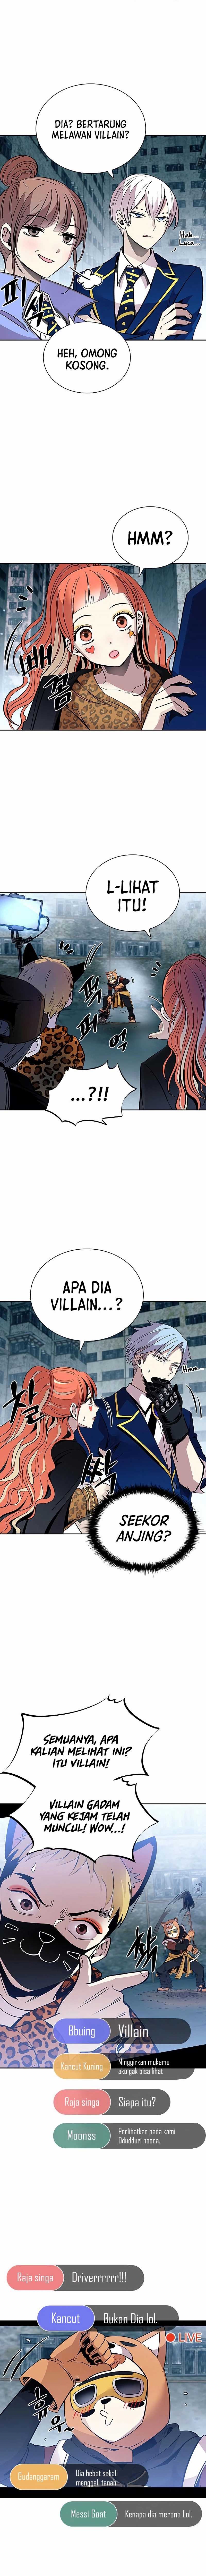 kill-to-villain-indo Chapter chapter-84